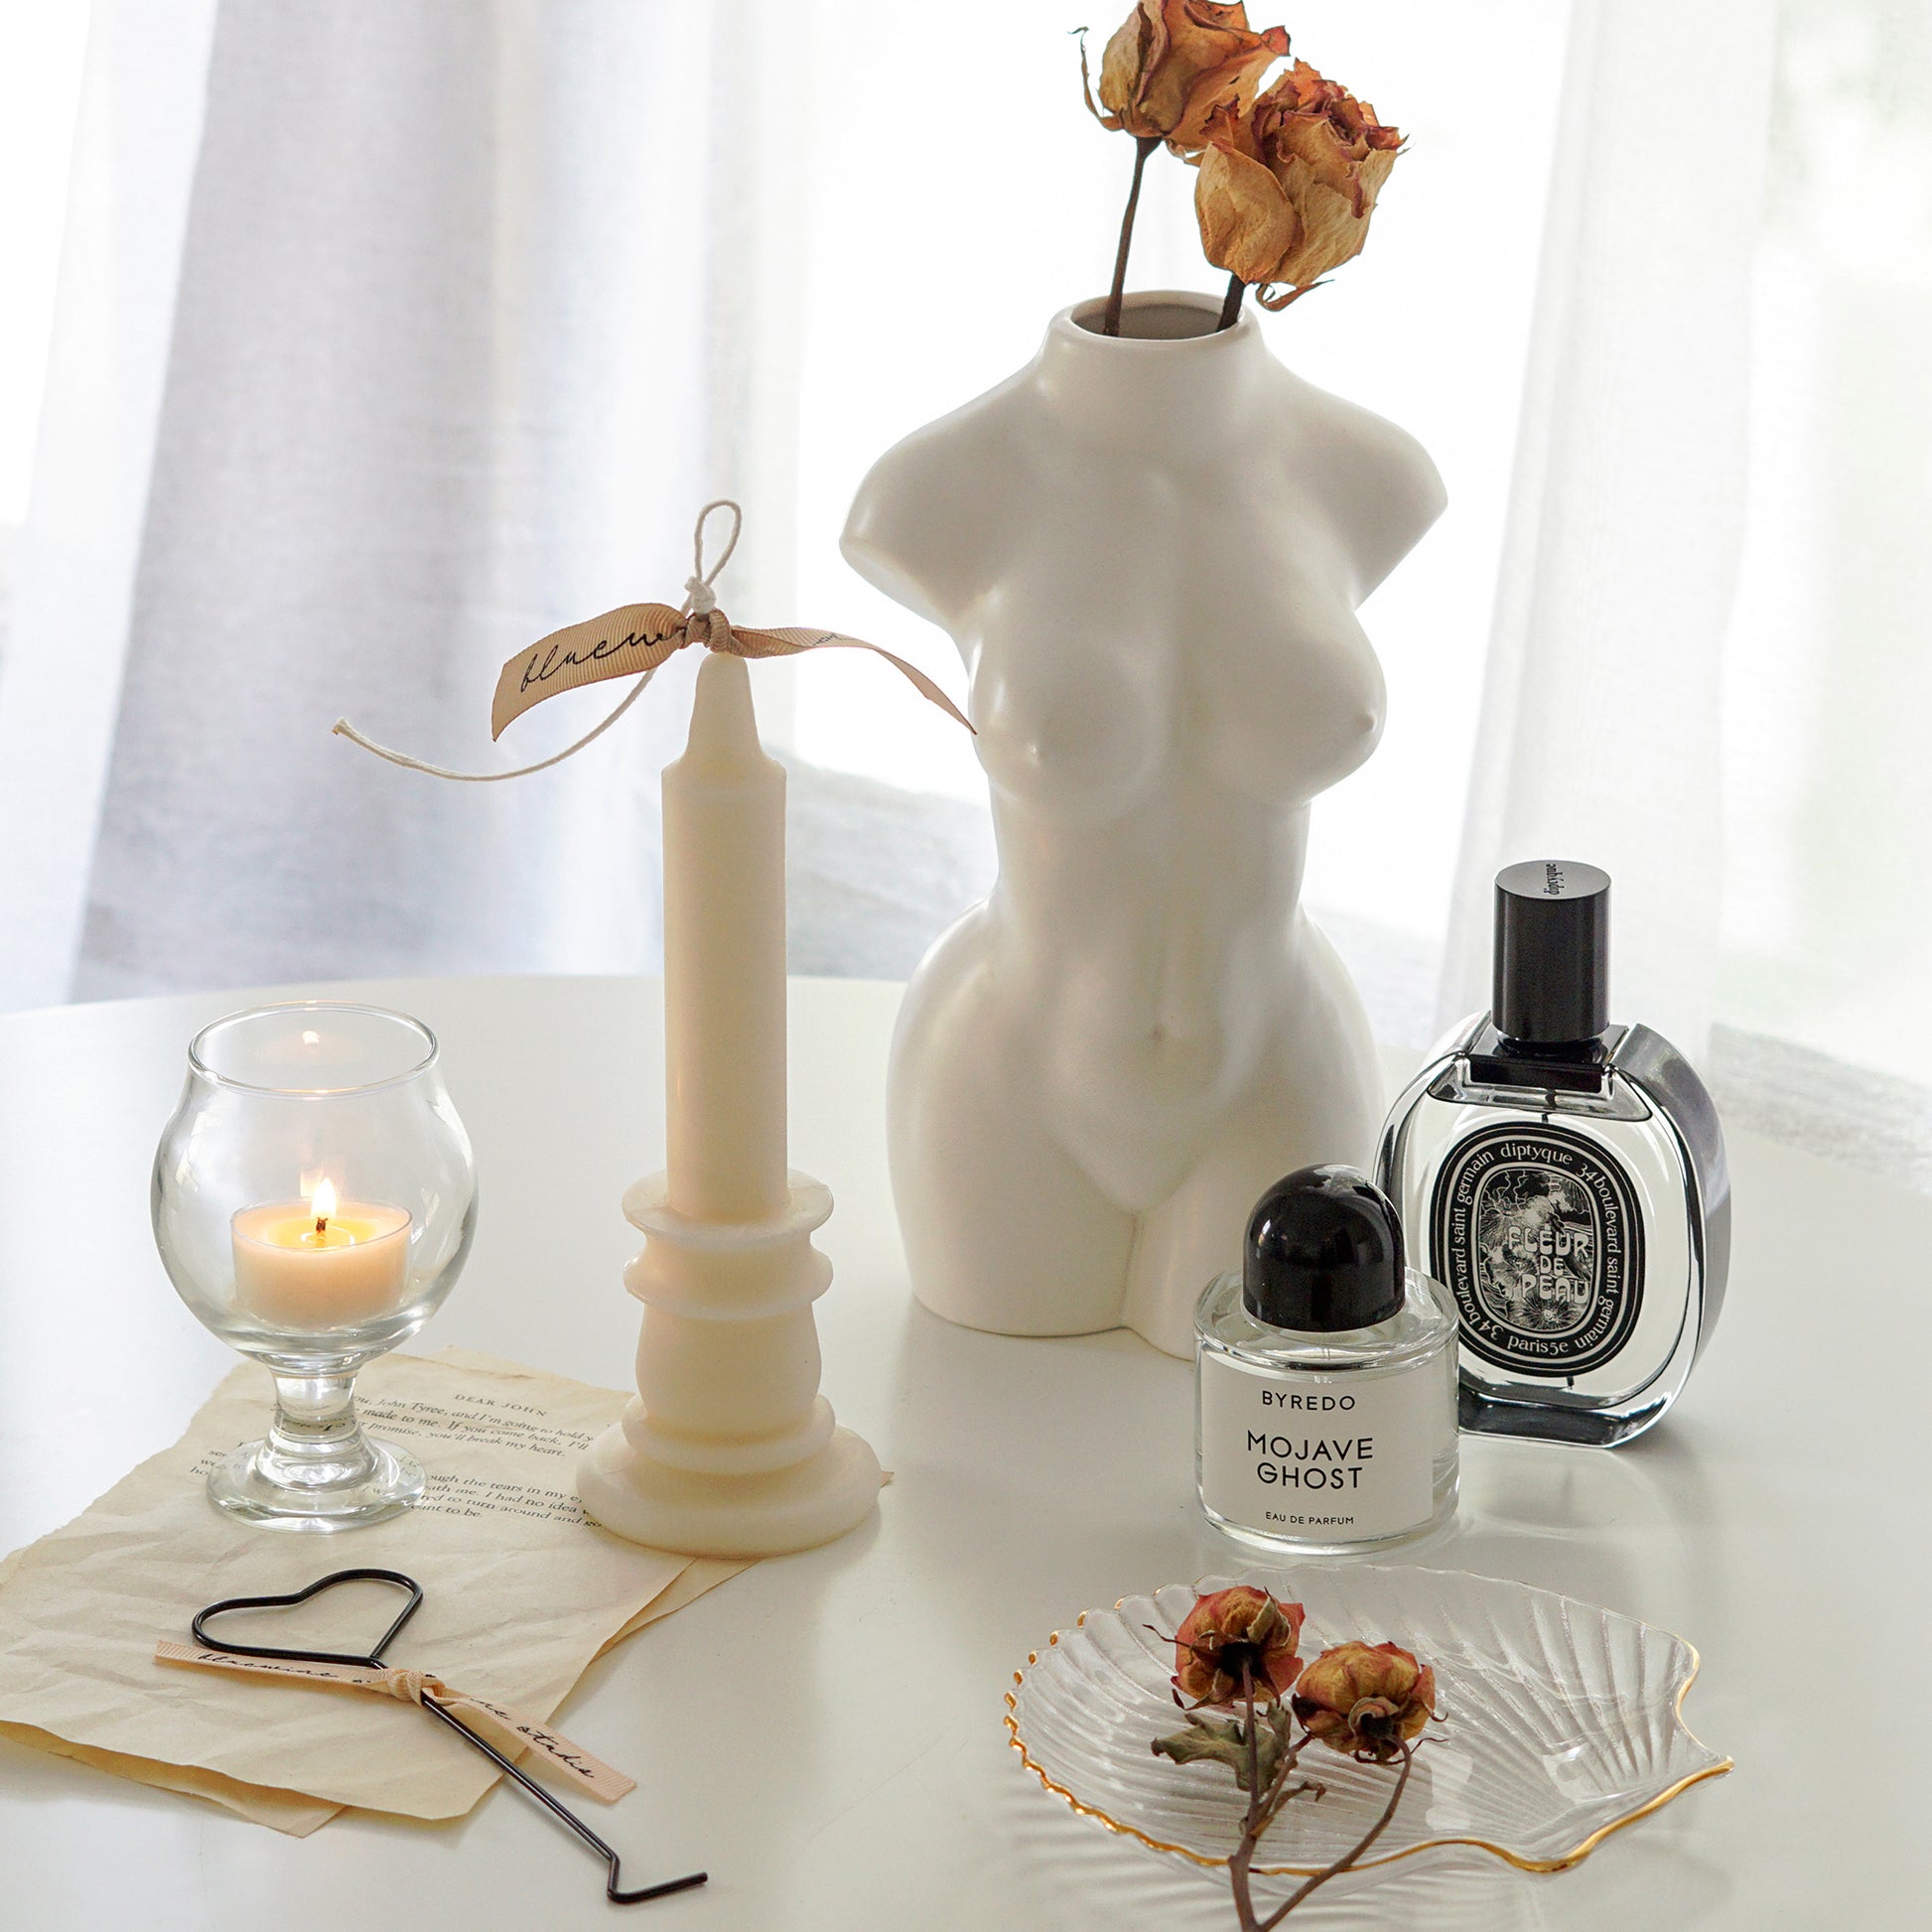 white candlestick shape soy pillar candle with beige bluewine studio ribbon, a lit tealight candle in a mini glass, and a heart wick dipper on book pages, orange dried roses on gold rim clear shell tray, Byredo Mojave Ghost, Diptyque Fleur de Peau, and feminine body vase with dried roses on white round table